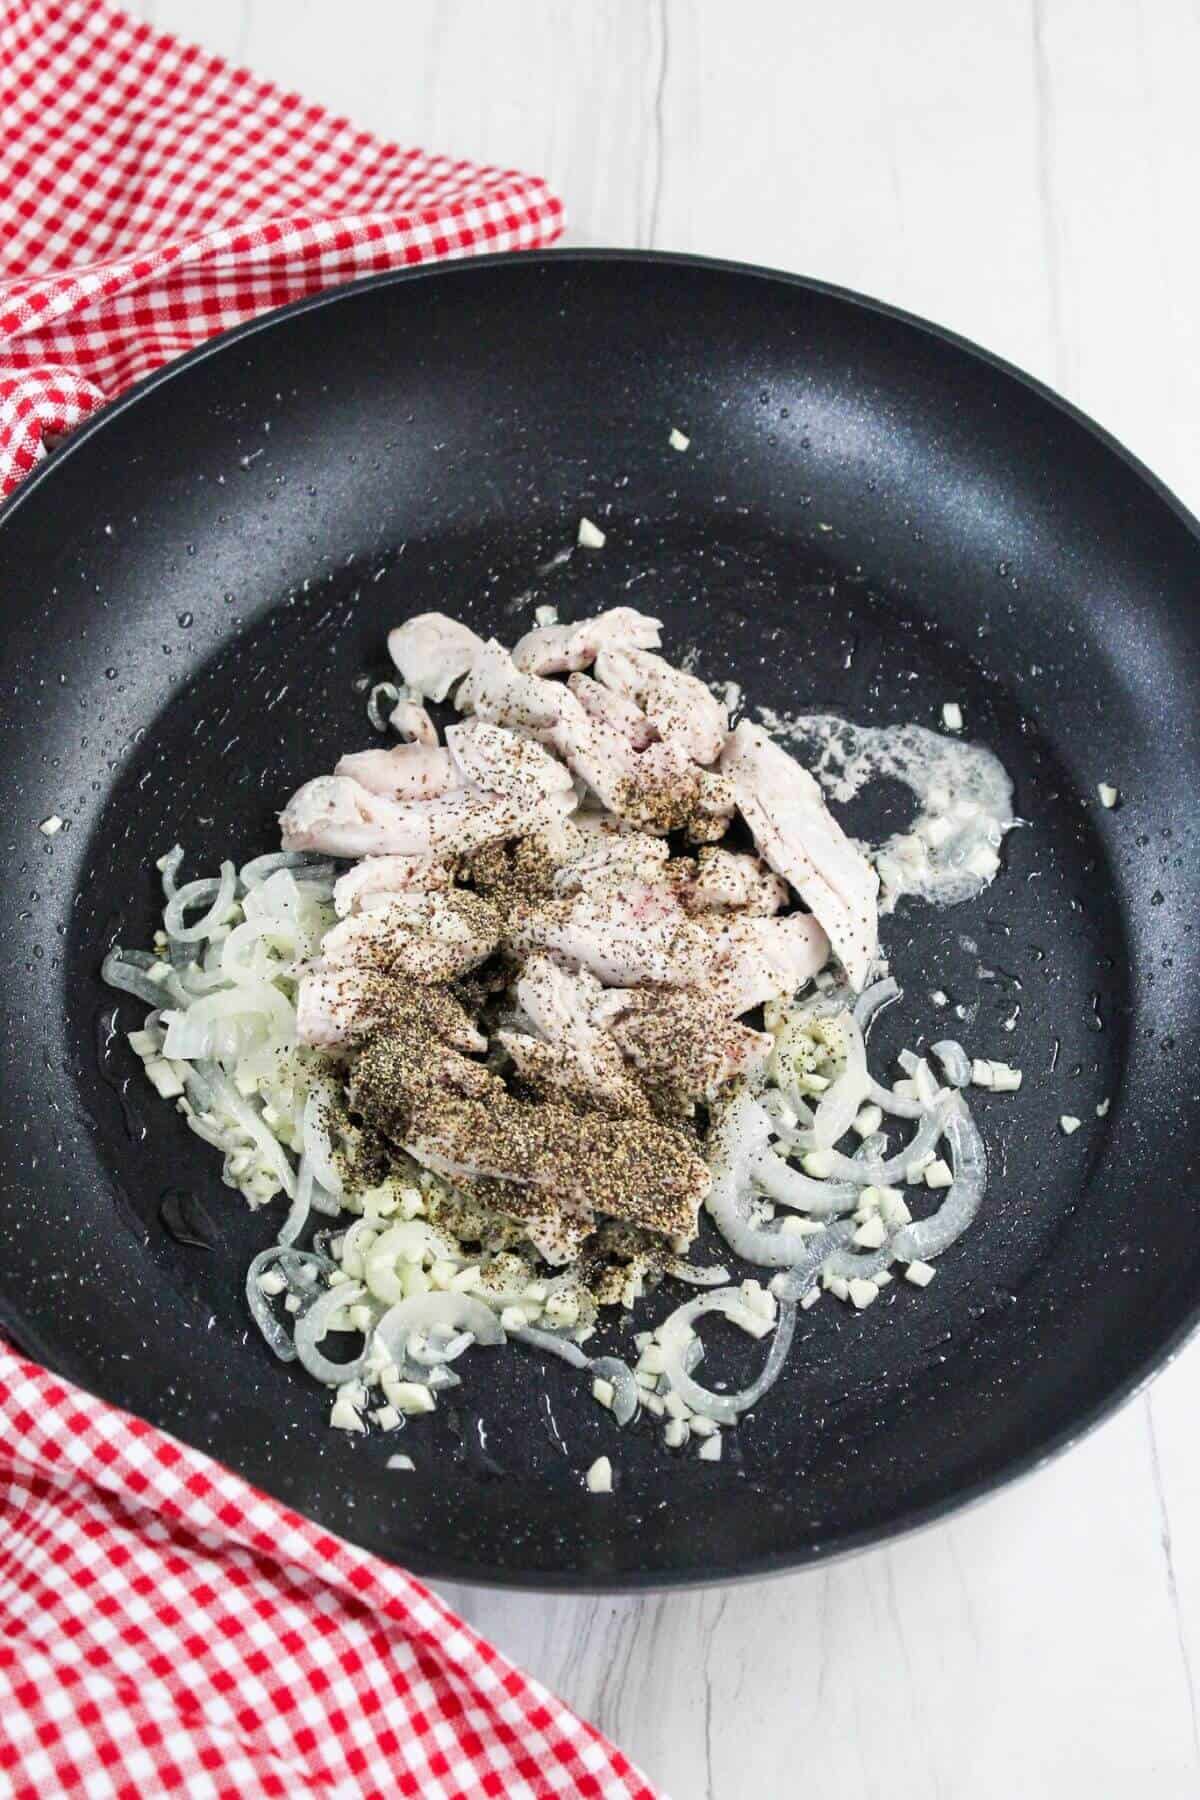 A black frying pan with onions and chicken in it.